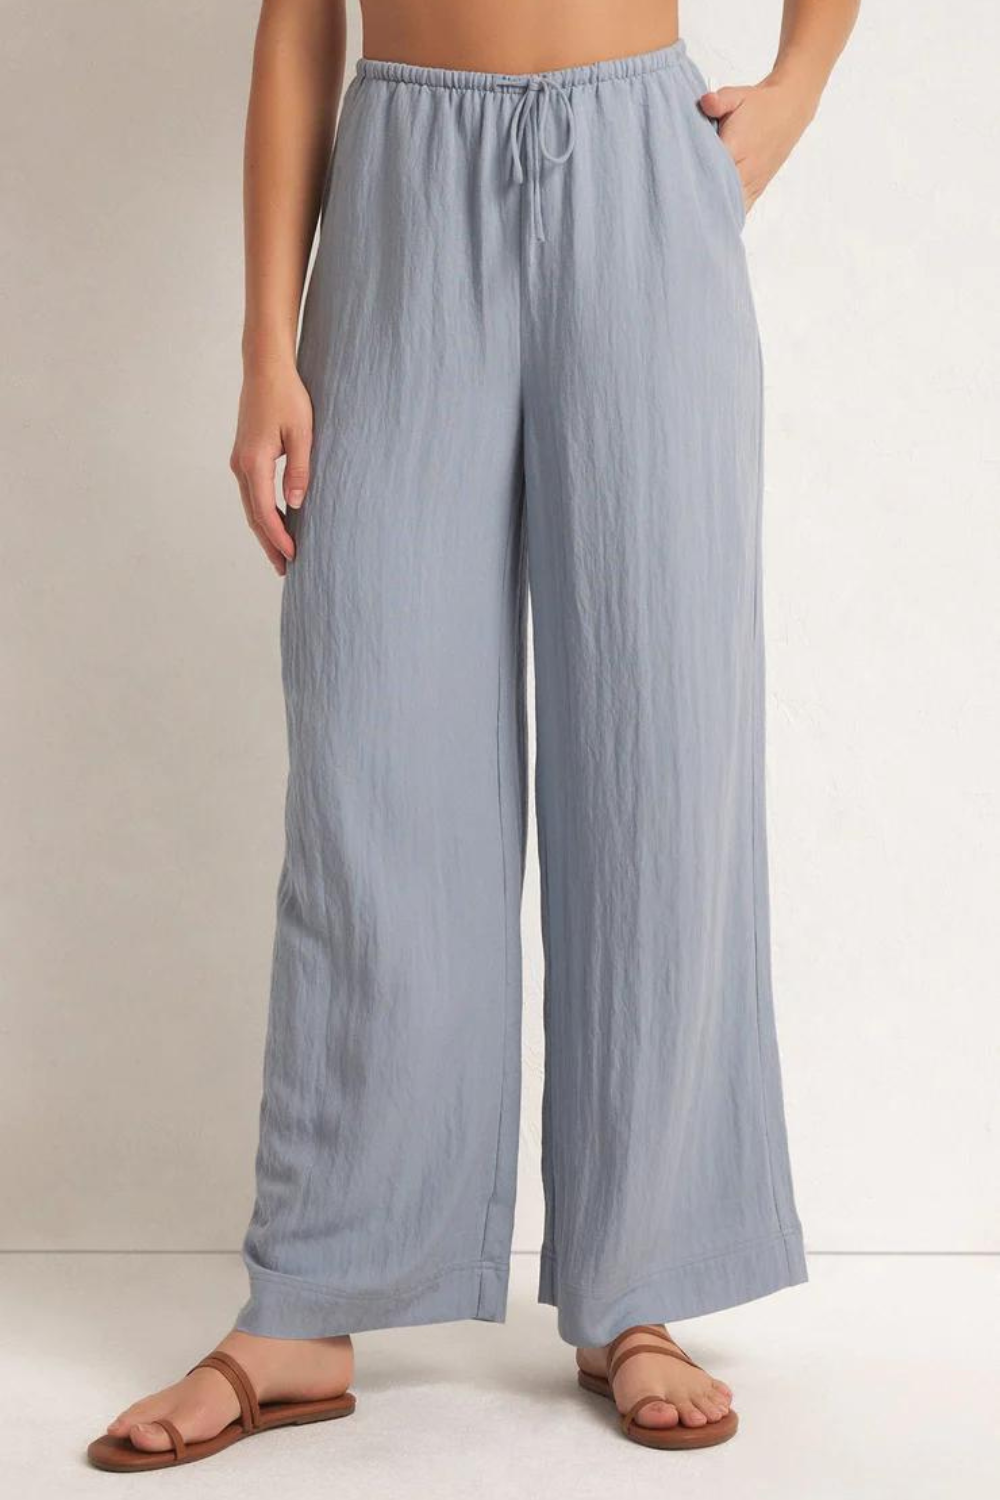 Z Supply Soleil Pants - Stormy